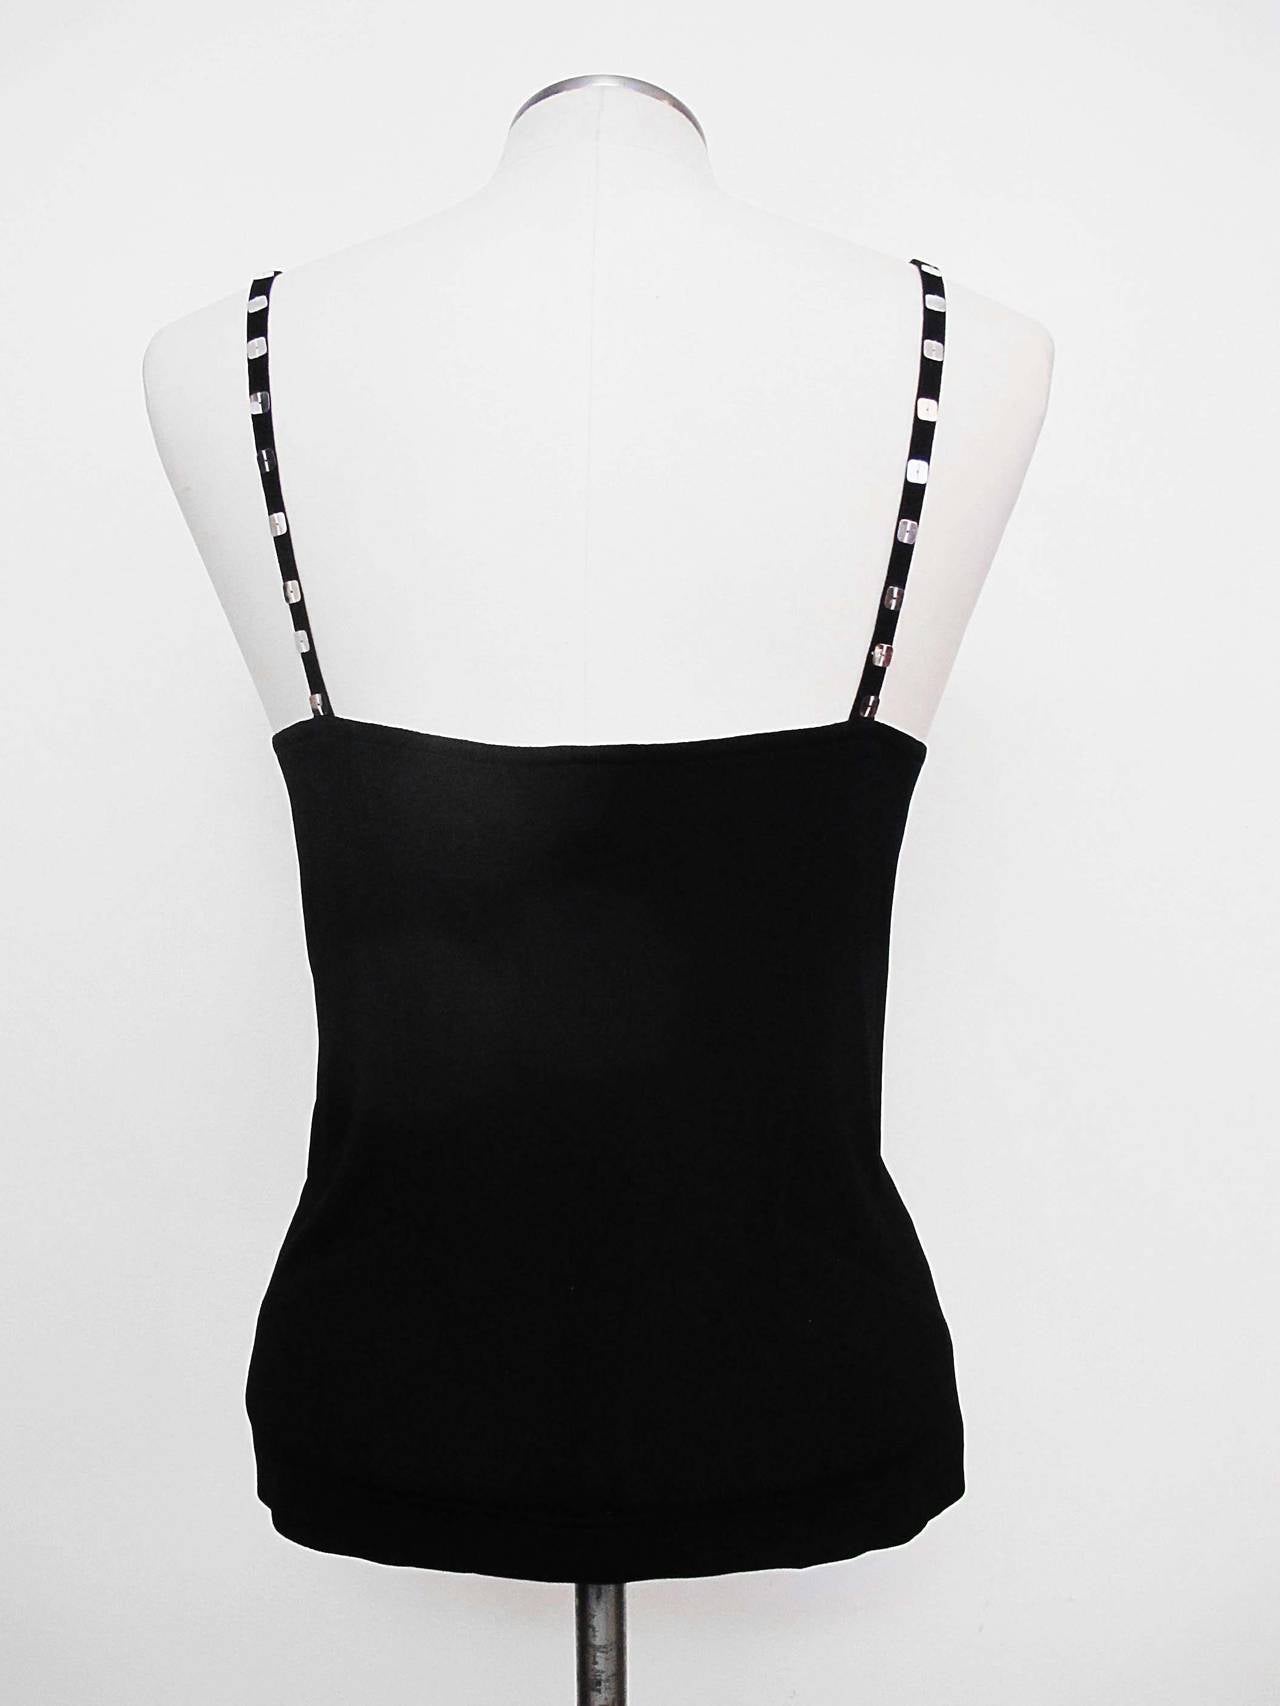 Women's New Jean Muir Black Tank top with Silver Sequins For Sale